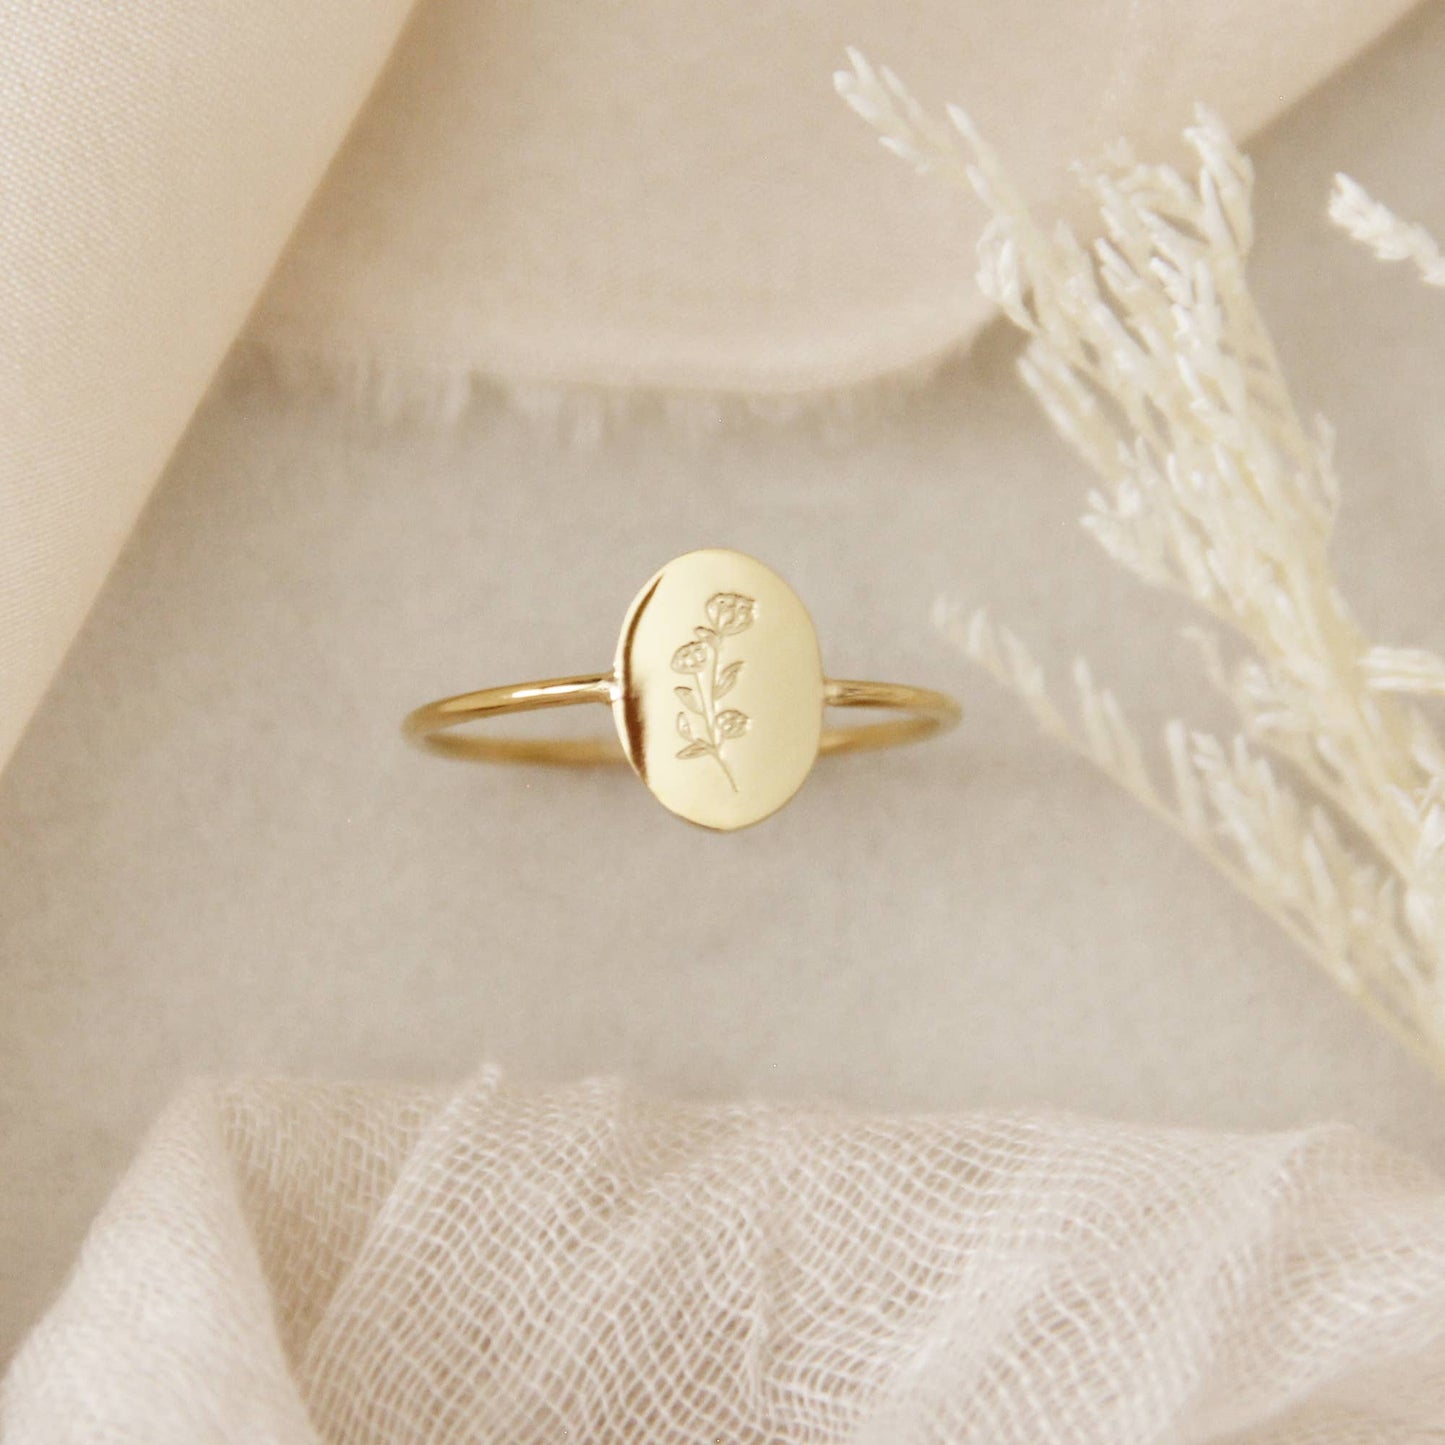 Oval Flower Ring, Isaiah 40:8